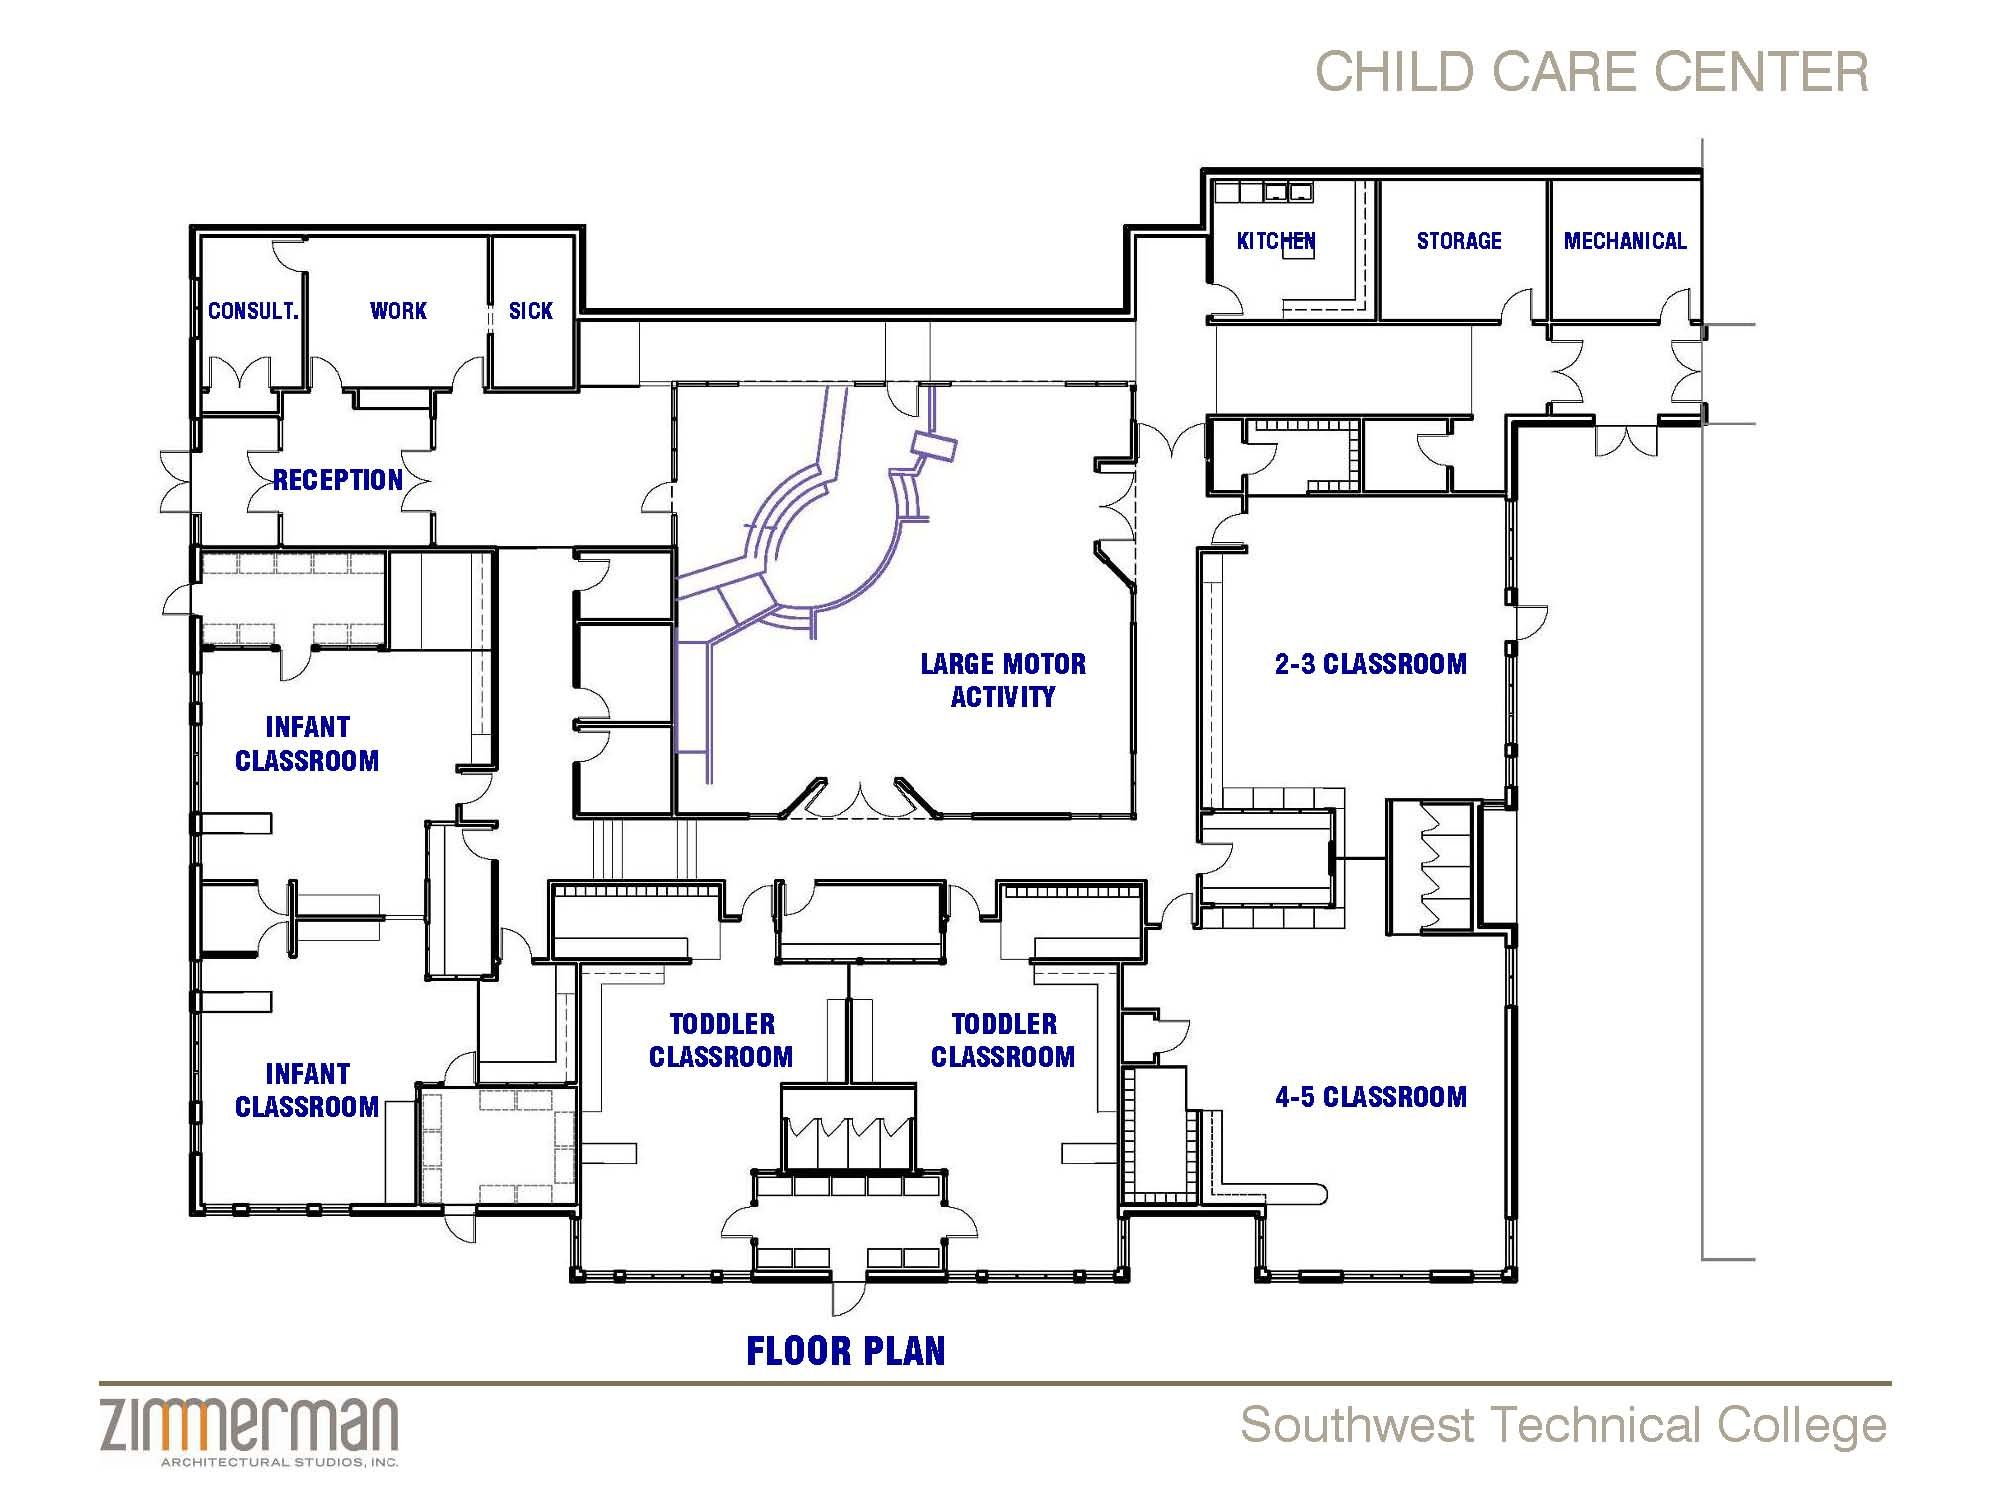 FACILITY SKETCH (Floor Plan) Family Child Care Home